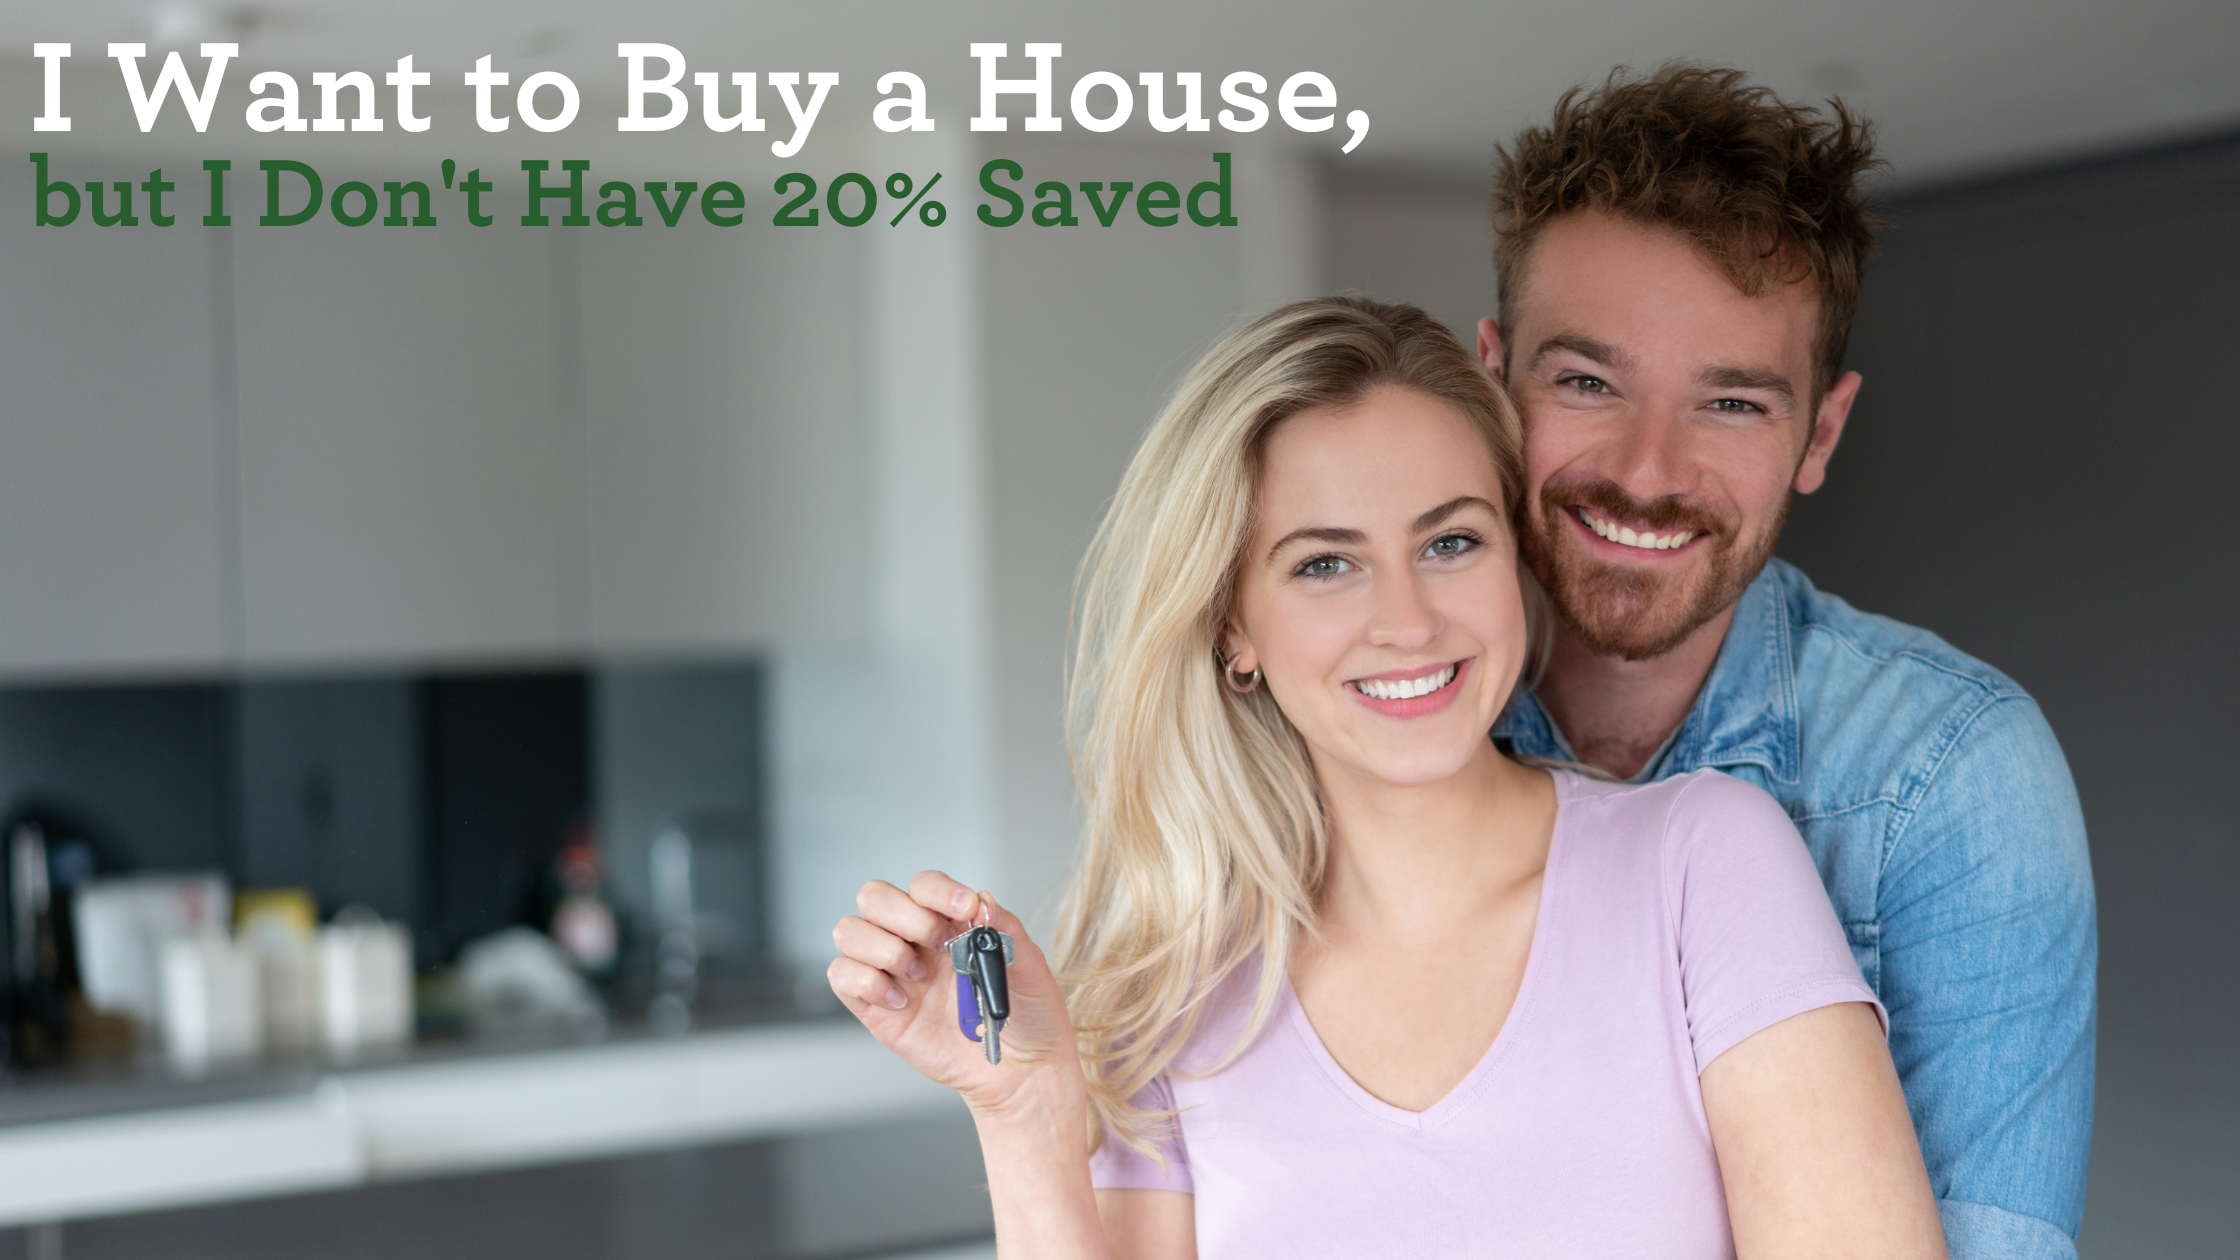 I Want to Buy a House, but I Don't Have 20% Saved